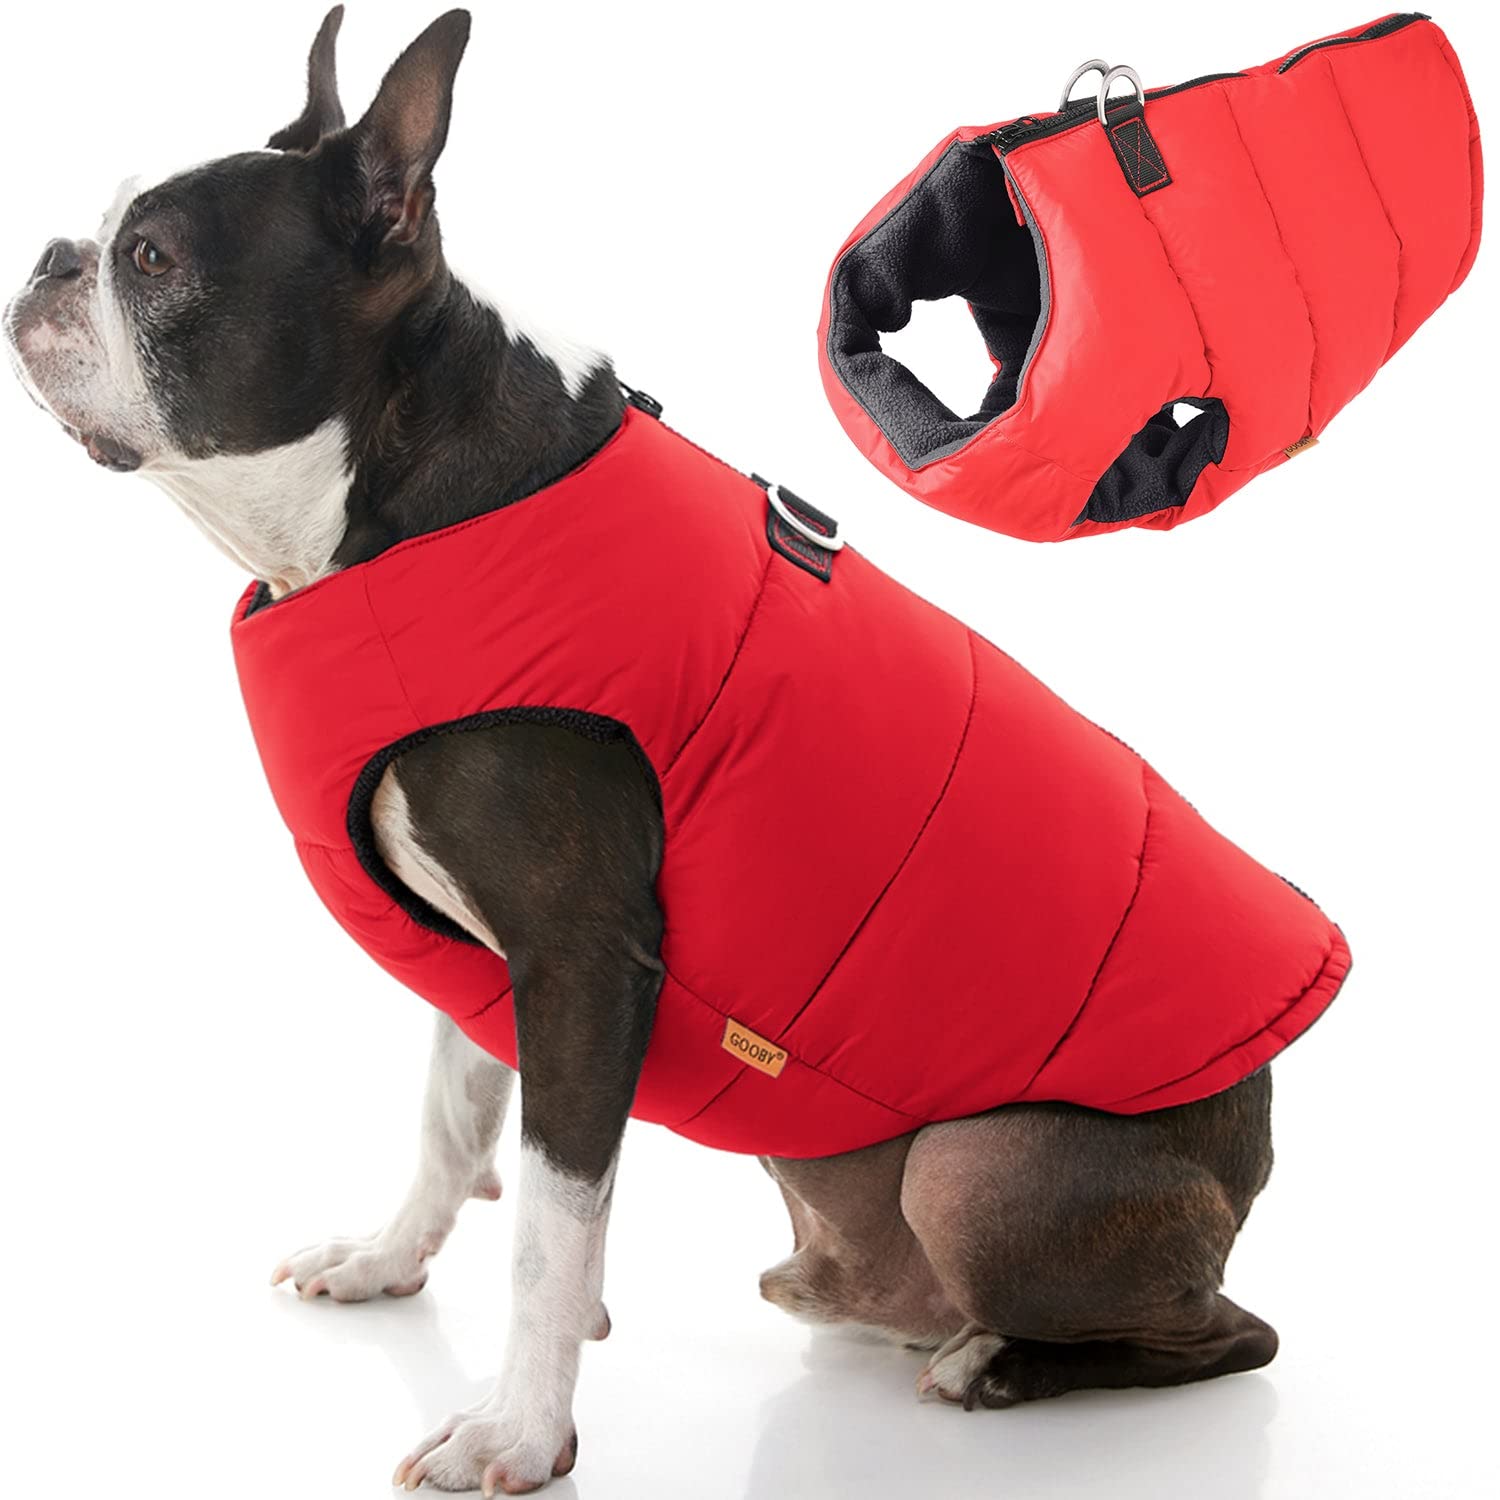 Gooby Padded Vest Dog Jacket - Solid Red, Medium - Warm Zip Up Dog Vest Fleece Jacket With Dual D Ring Leash - Winter Water Resi